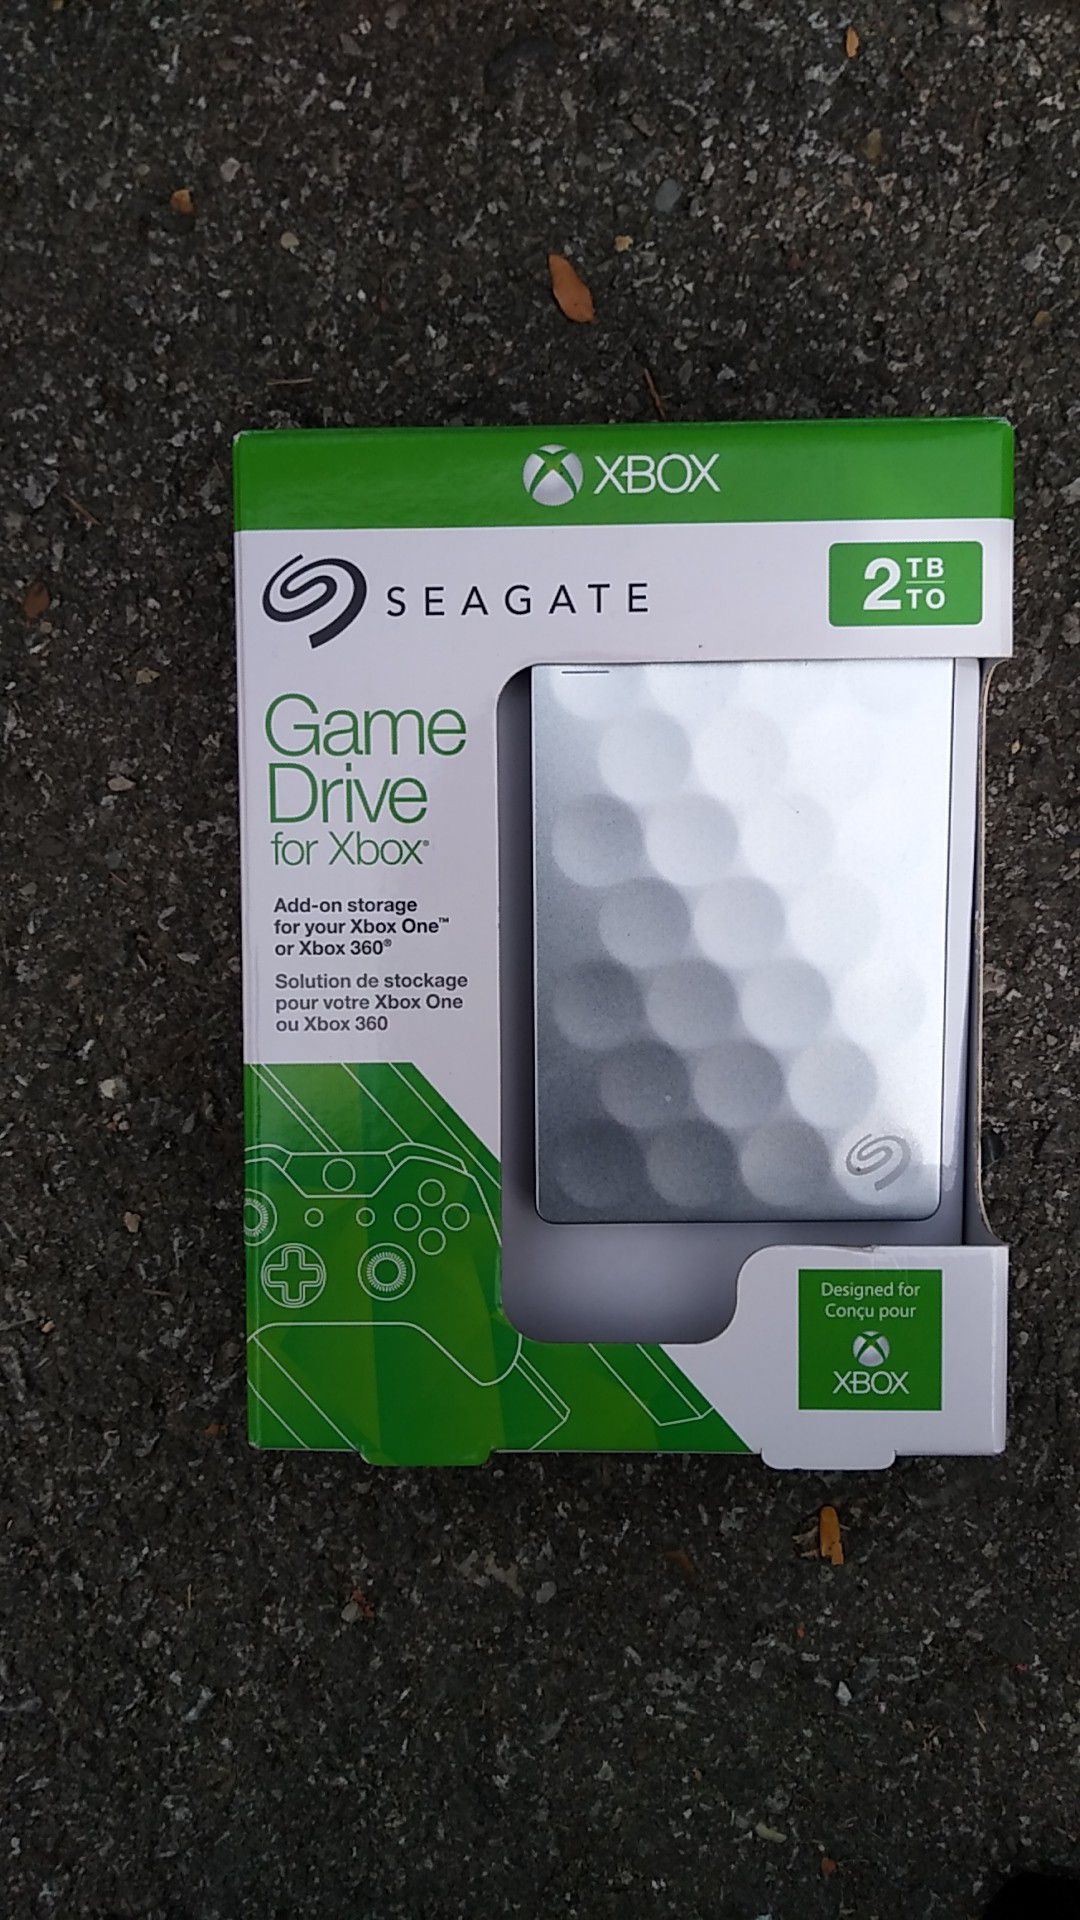 Game drive for Xbox - 2tb - Xbox One or Xbox 360